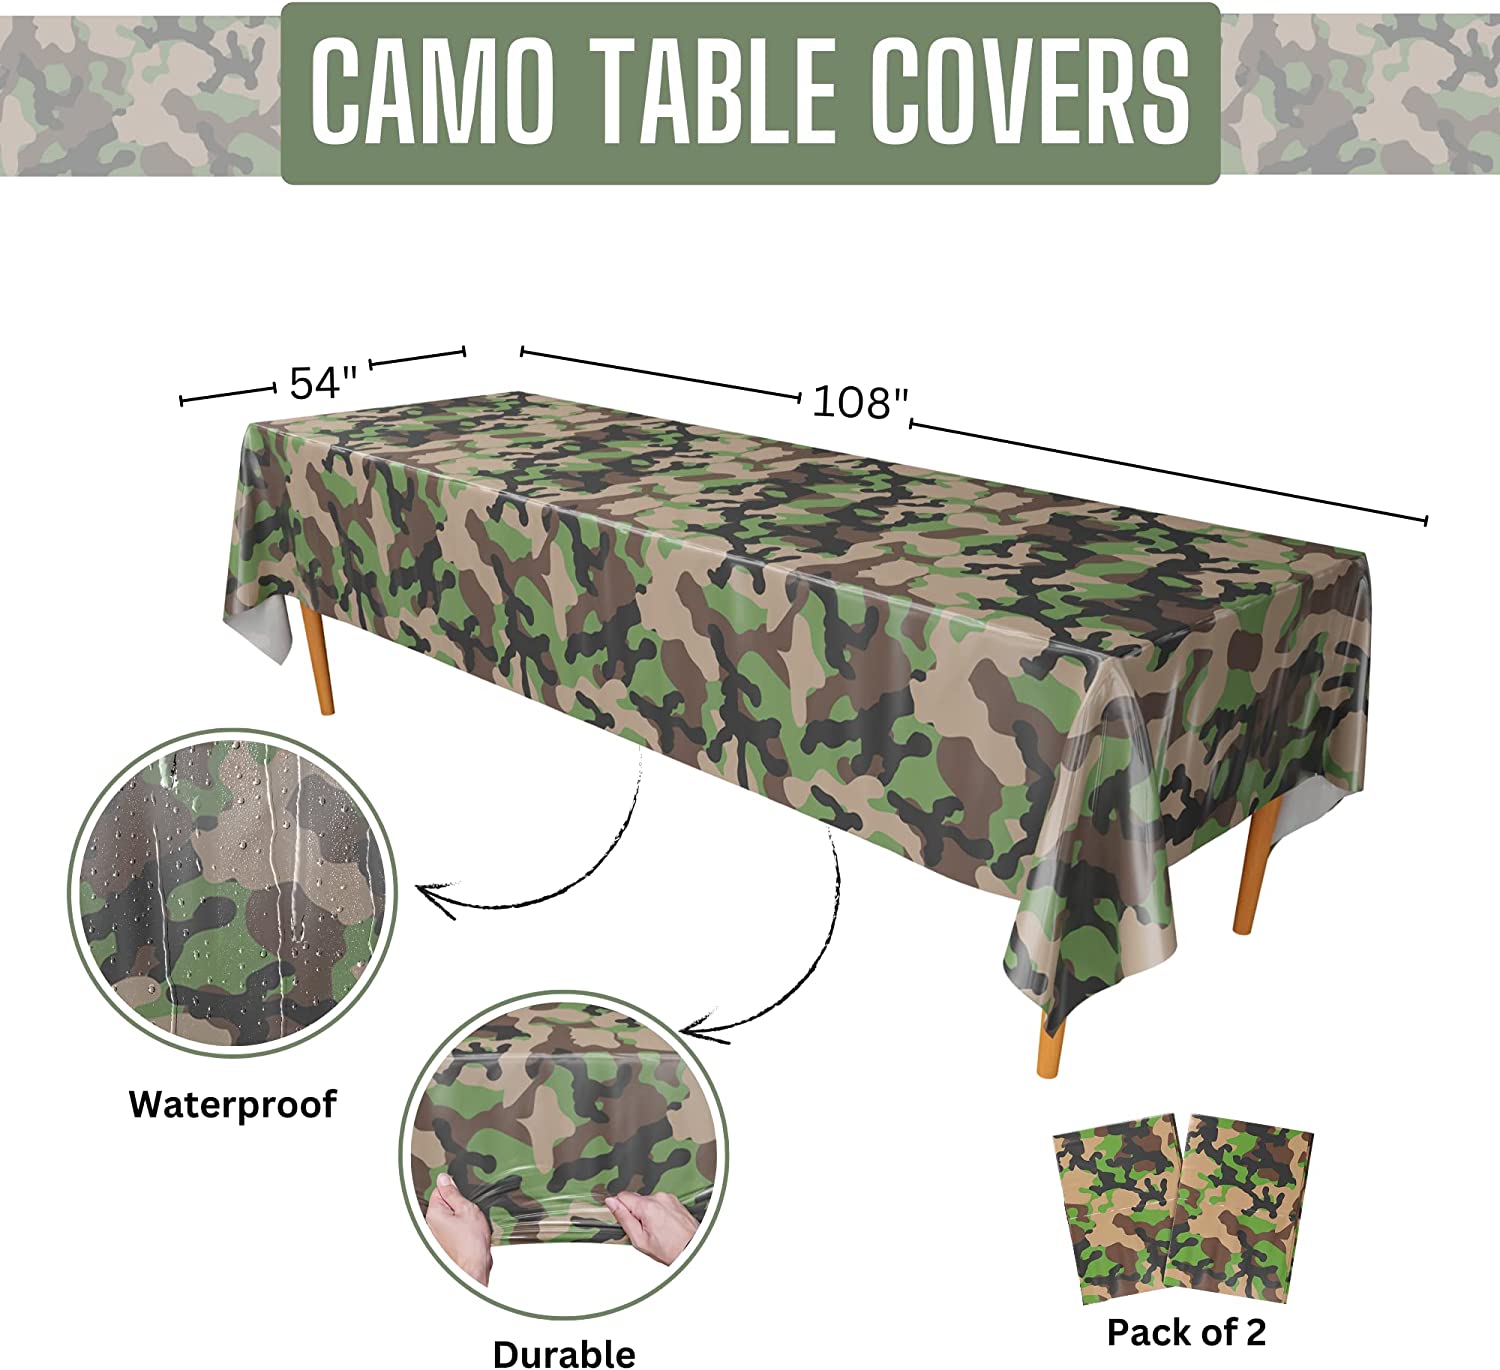 Waterproof and Durable Camo Party Table Covers (Pack of 2) - 54"x108" XL - Camouflage Party Supplies, Camo Party Supplies, Camo Plastic Table Cover, Army Table Cover, Camo Theme Party, Army Green Party